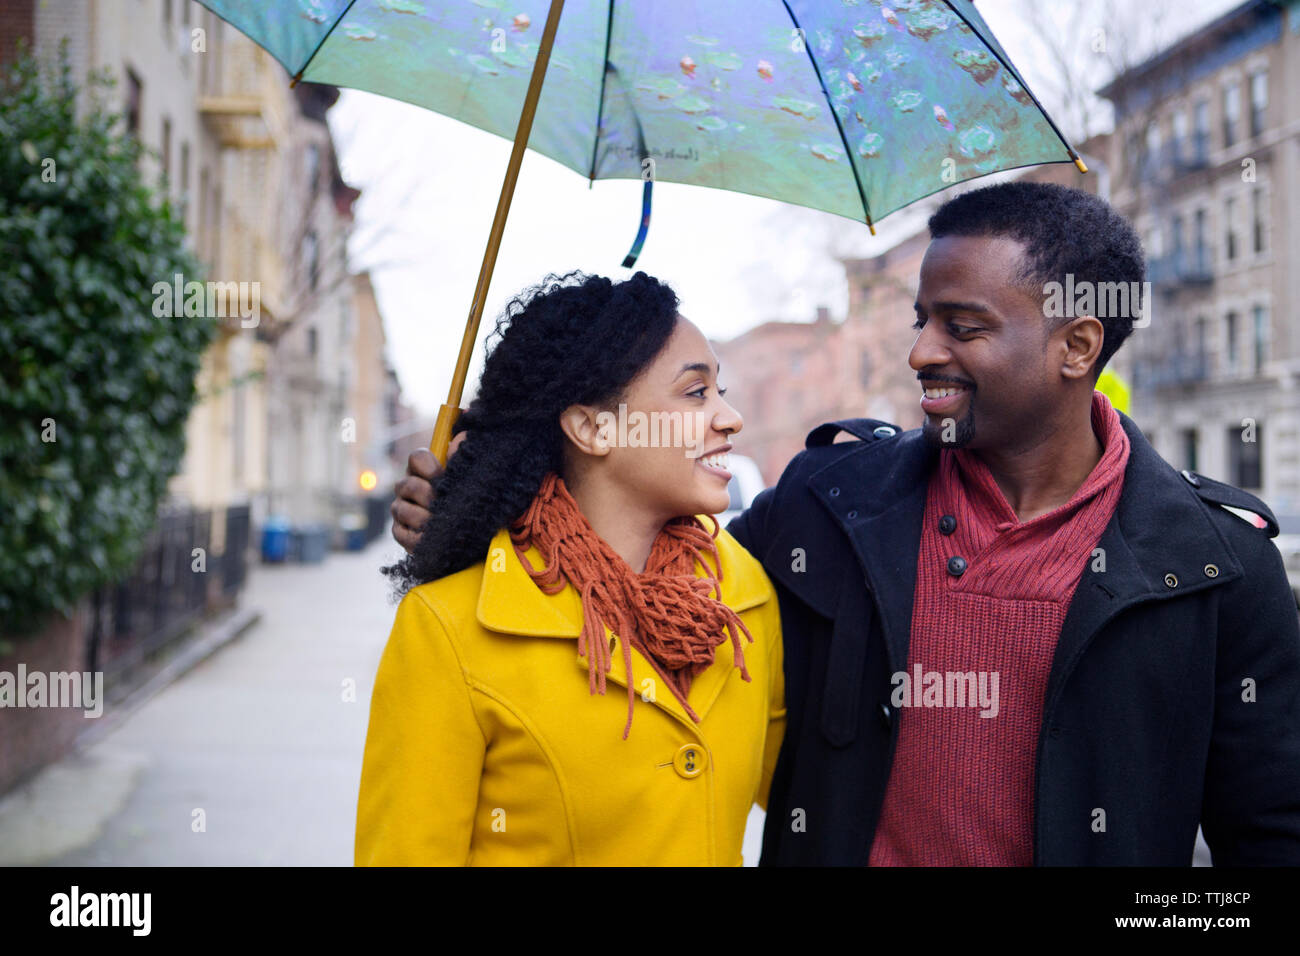 Man holding umbrella while walking with woman on road in city Stock Photo